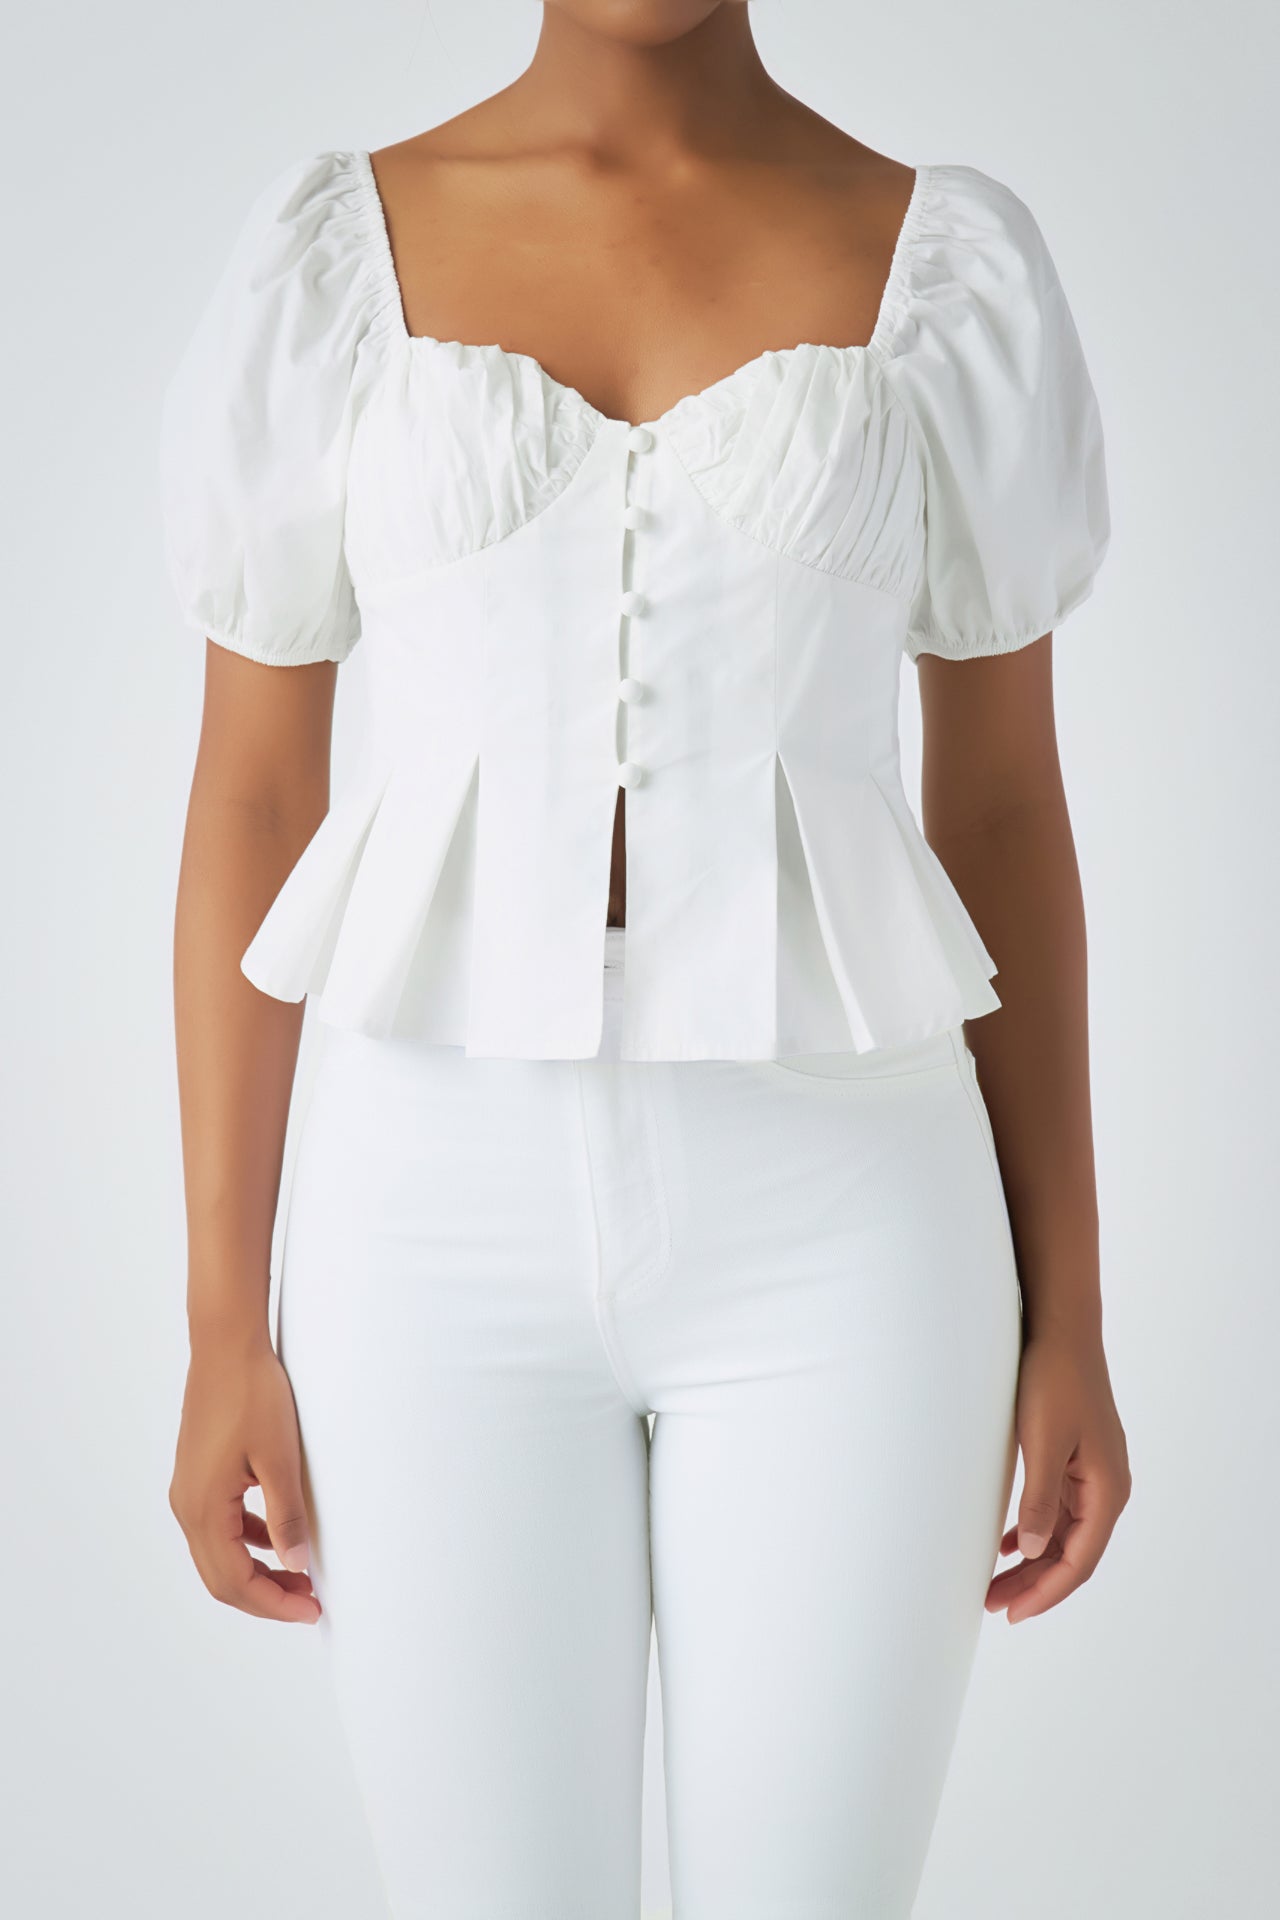 Endless Rose - Corset Top with Pleats - Tops in Women's Clothing available at endlessrose.com